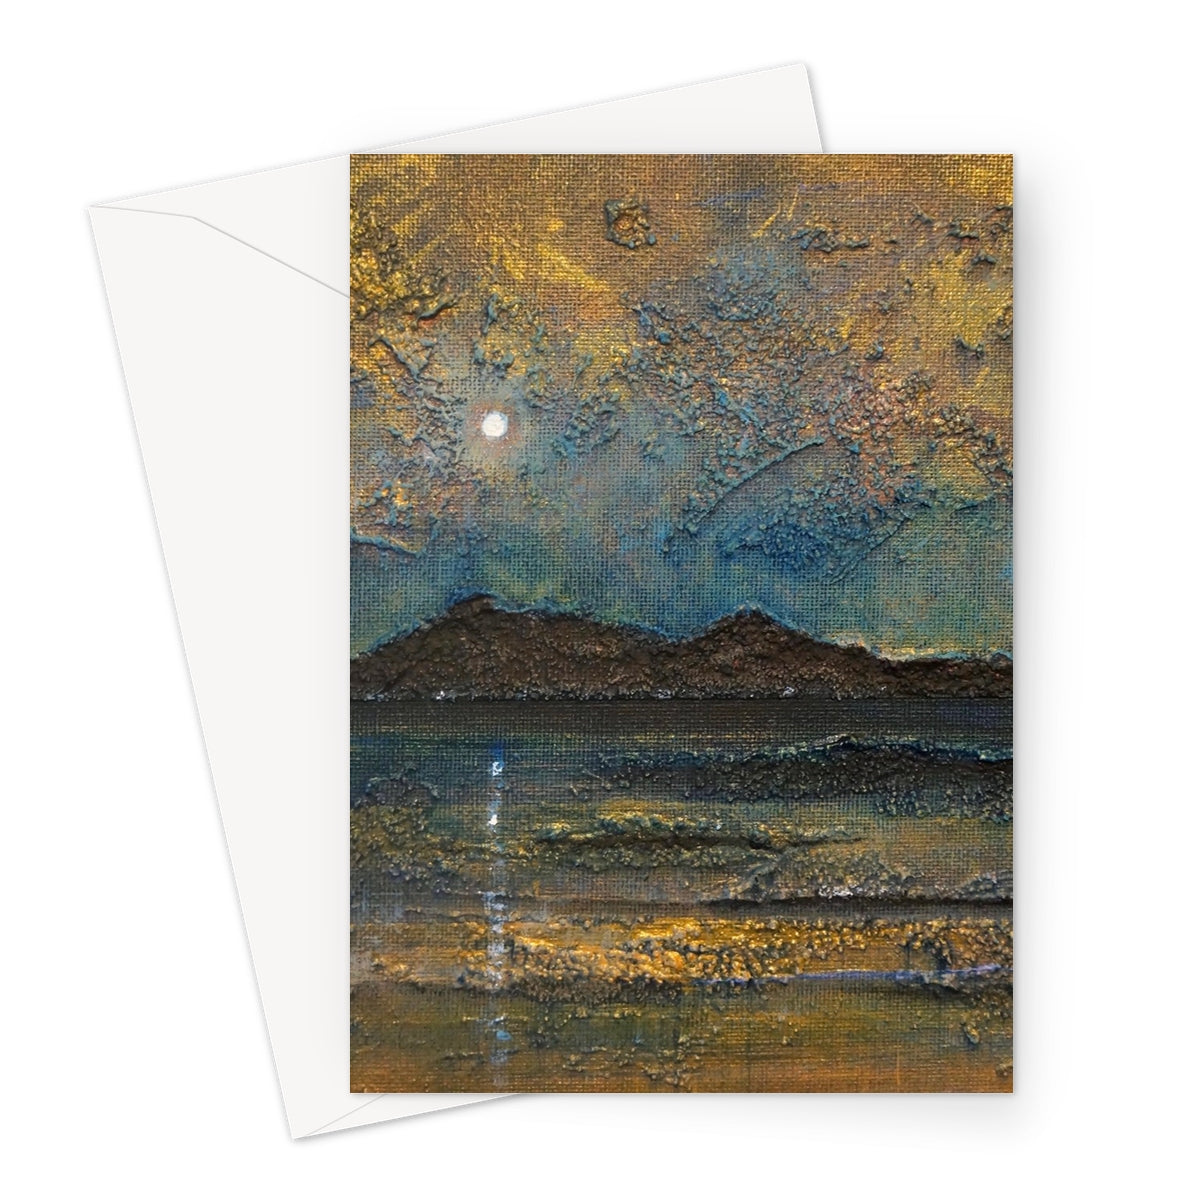 Arran Moonlight Art Gifts Greeting Card-Greetings Cards-Arran Art Gallery-A5 Portrait-1 Card-Paintings, Prints, Homeware, Art Gifts From Scotland By Scottish Artist Kevin Hunter